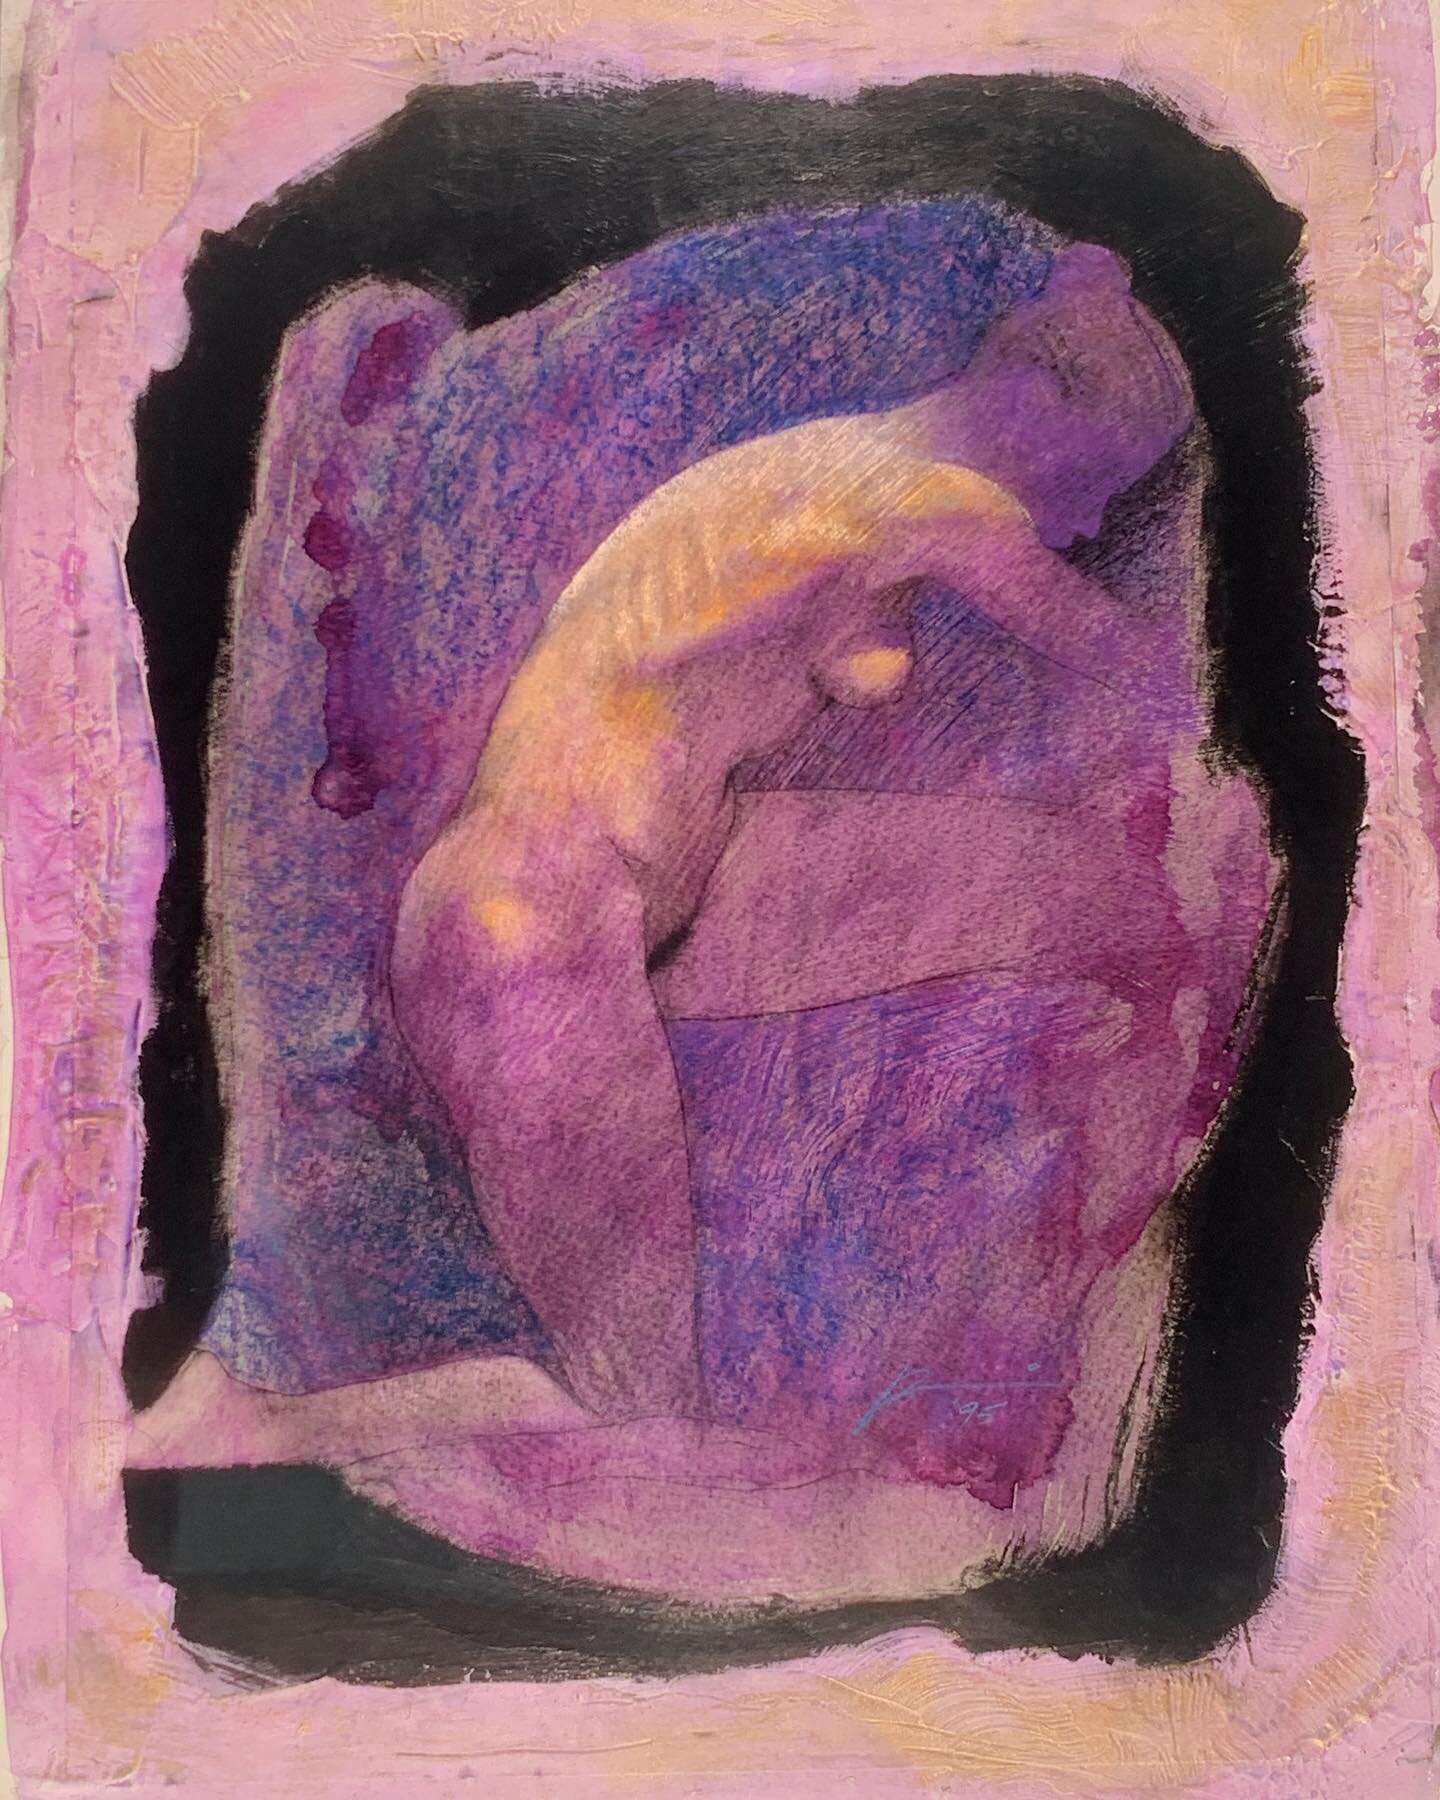 Another live #figure drawing from way back. It was done with charcoal and pastel and then sealed with matte medium. Then a purple watercolor wash went down, then black paint and finally gesso around the edges. .
.
.
www.youtube.com/c/chrispetrocchi 
